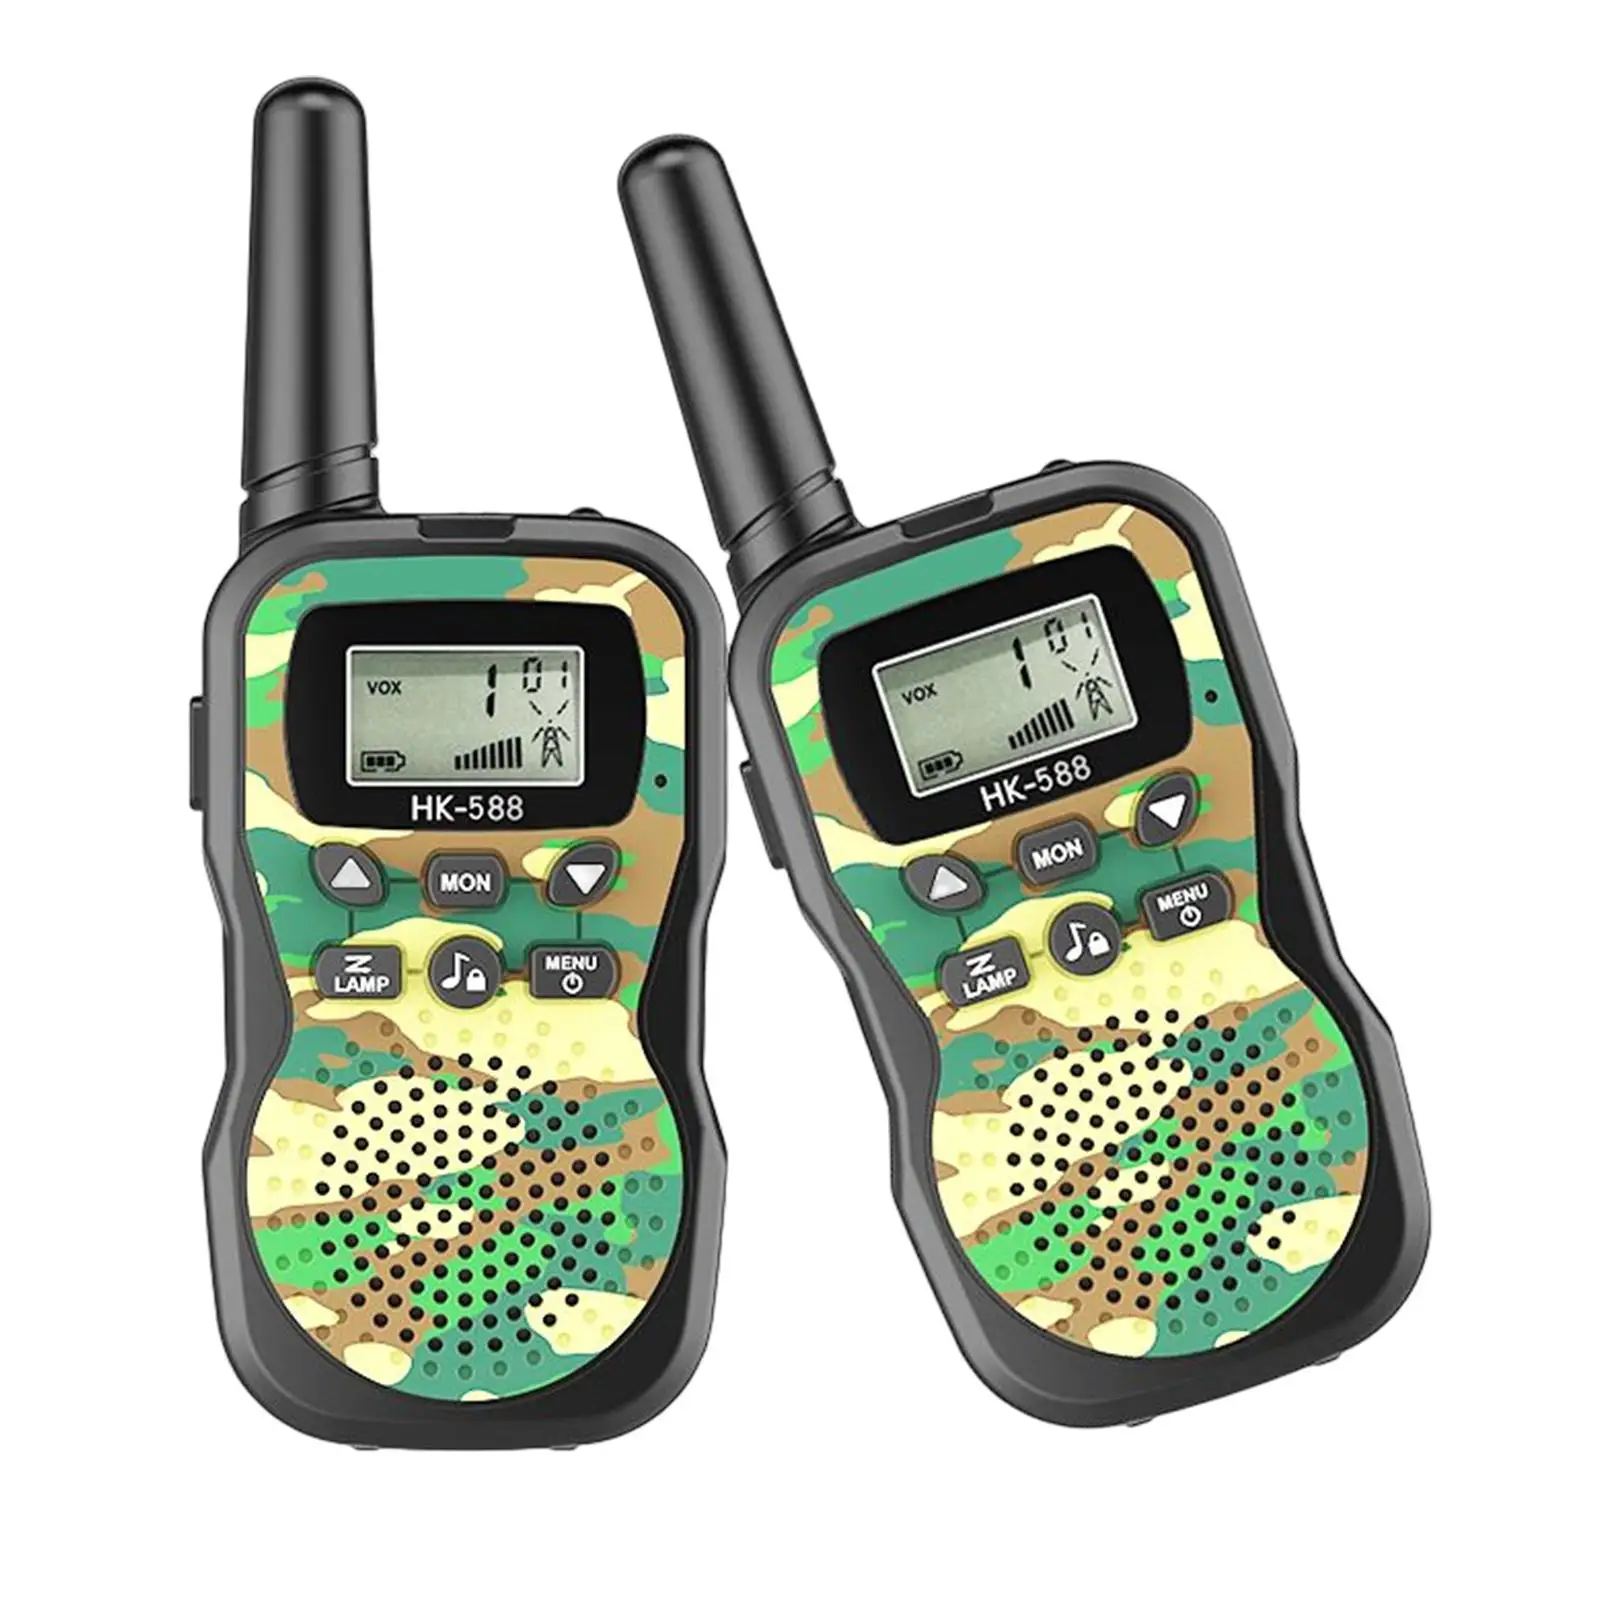 Outdoor Kids Walkie Talkies Toy Two Way Radios for 3-12 Year Old Boys Girls 5.7x3.5inch Interactive Long Range with Backlit LCD